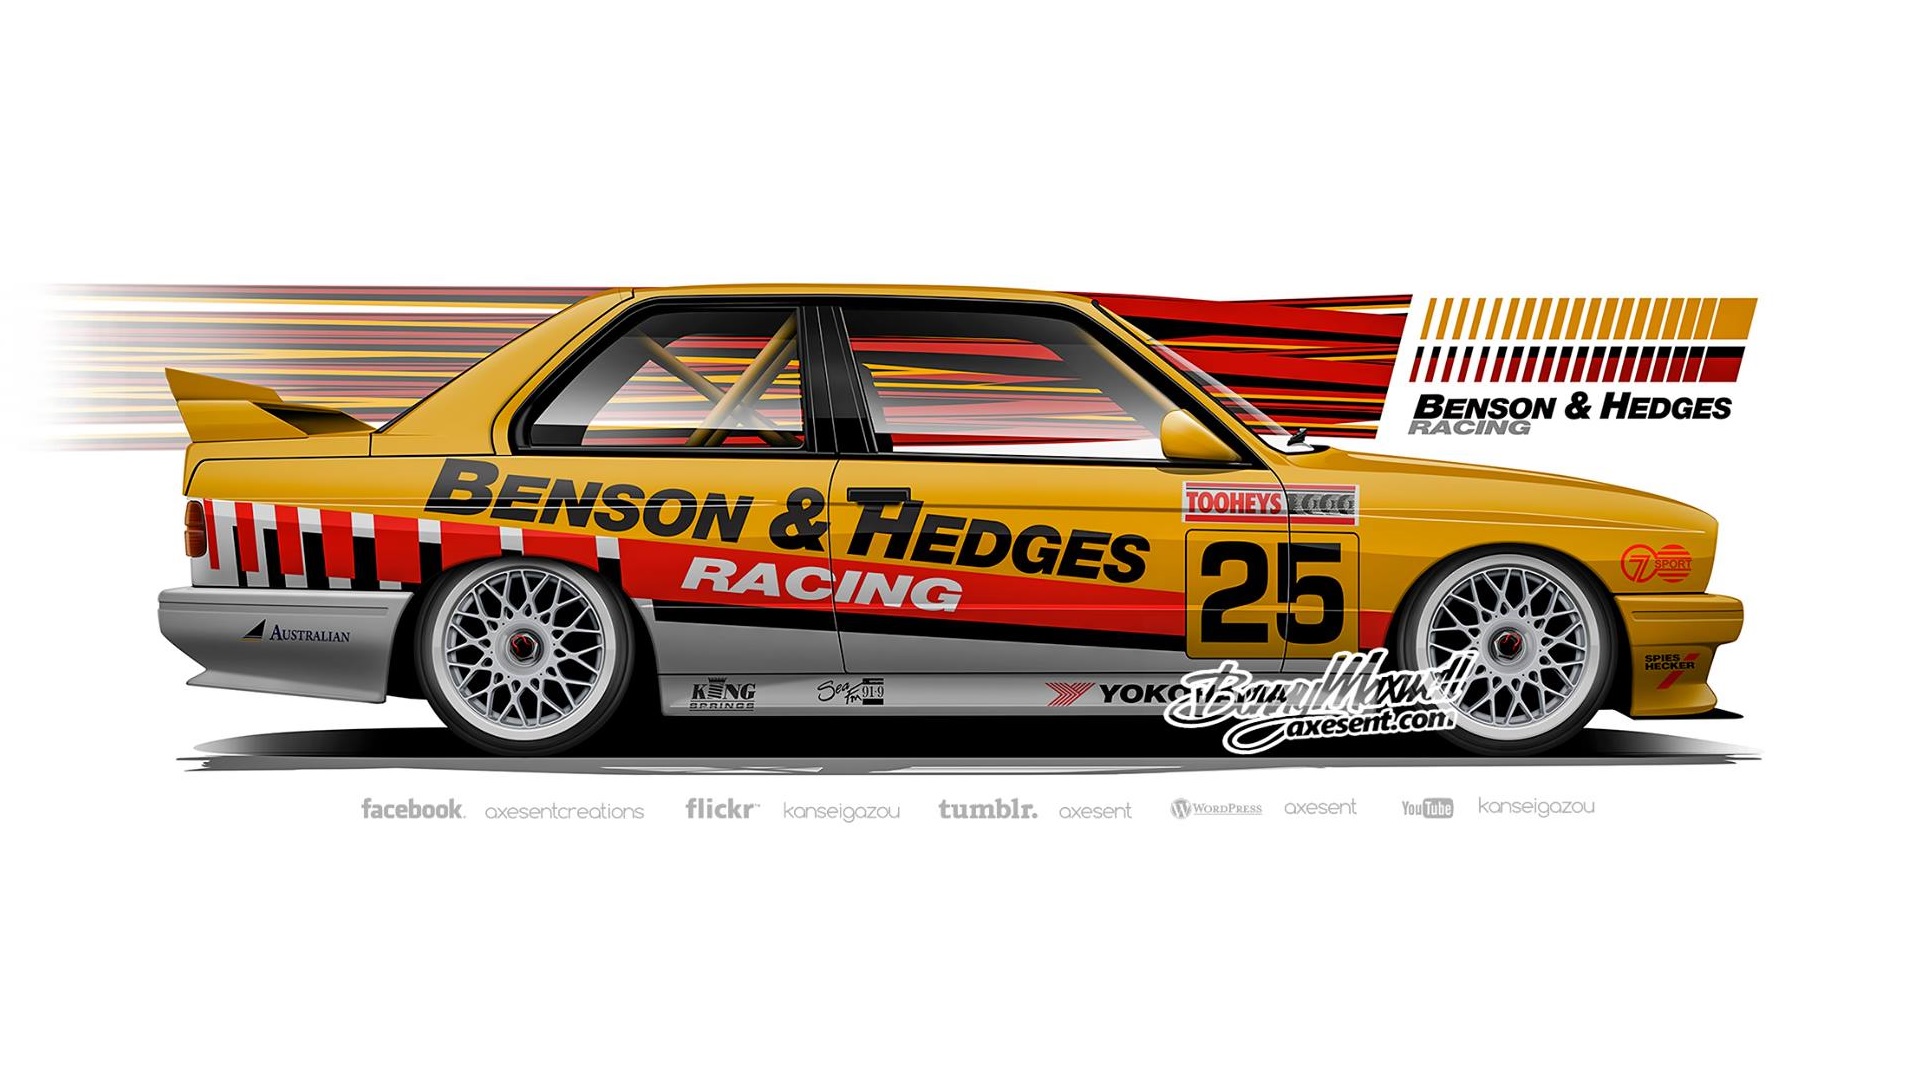 Axesent Creations BMW M3 E30 Render Race Cars German Cars BMW Side View BMW 3 Series BMW E30 1920x1080